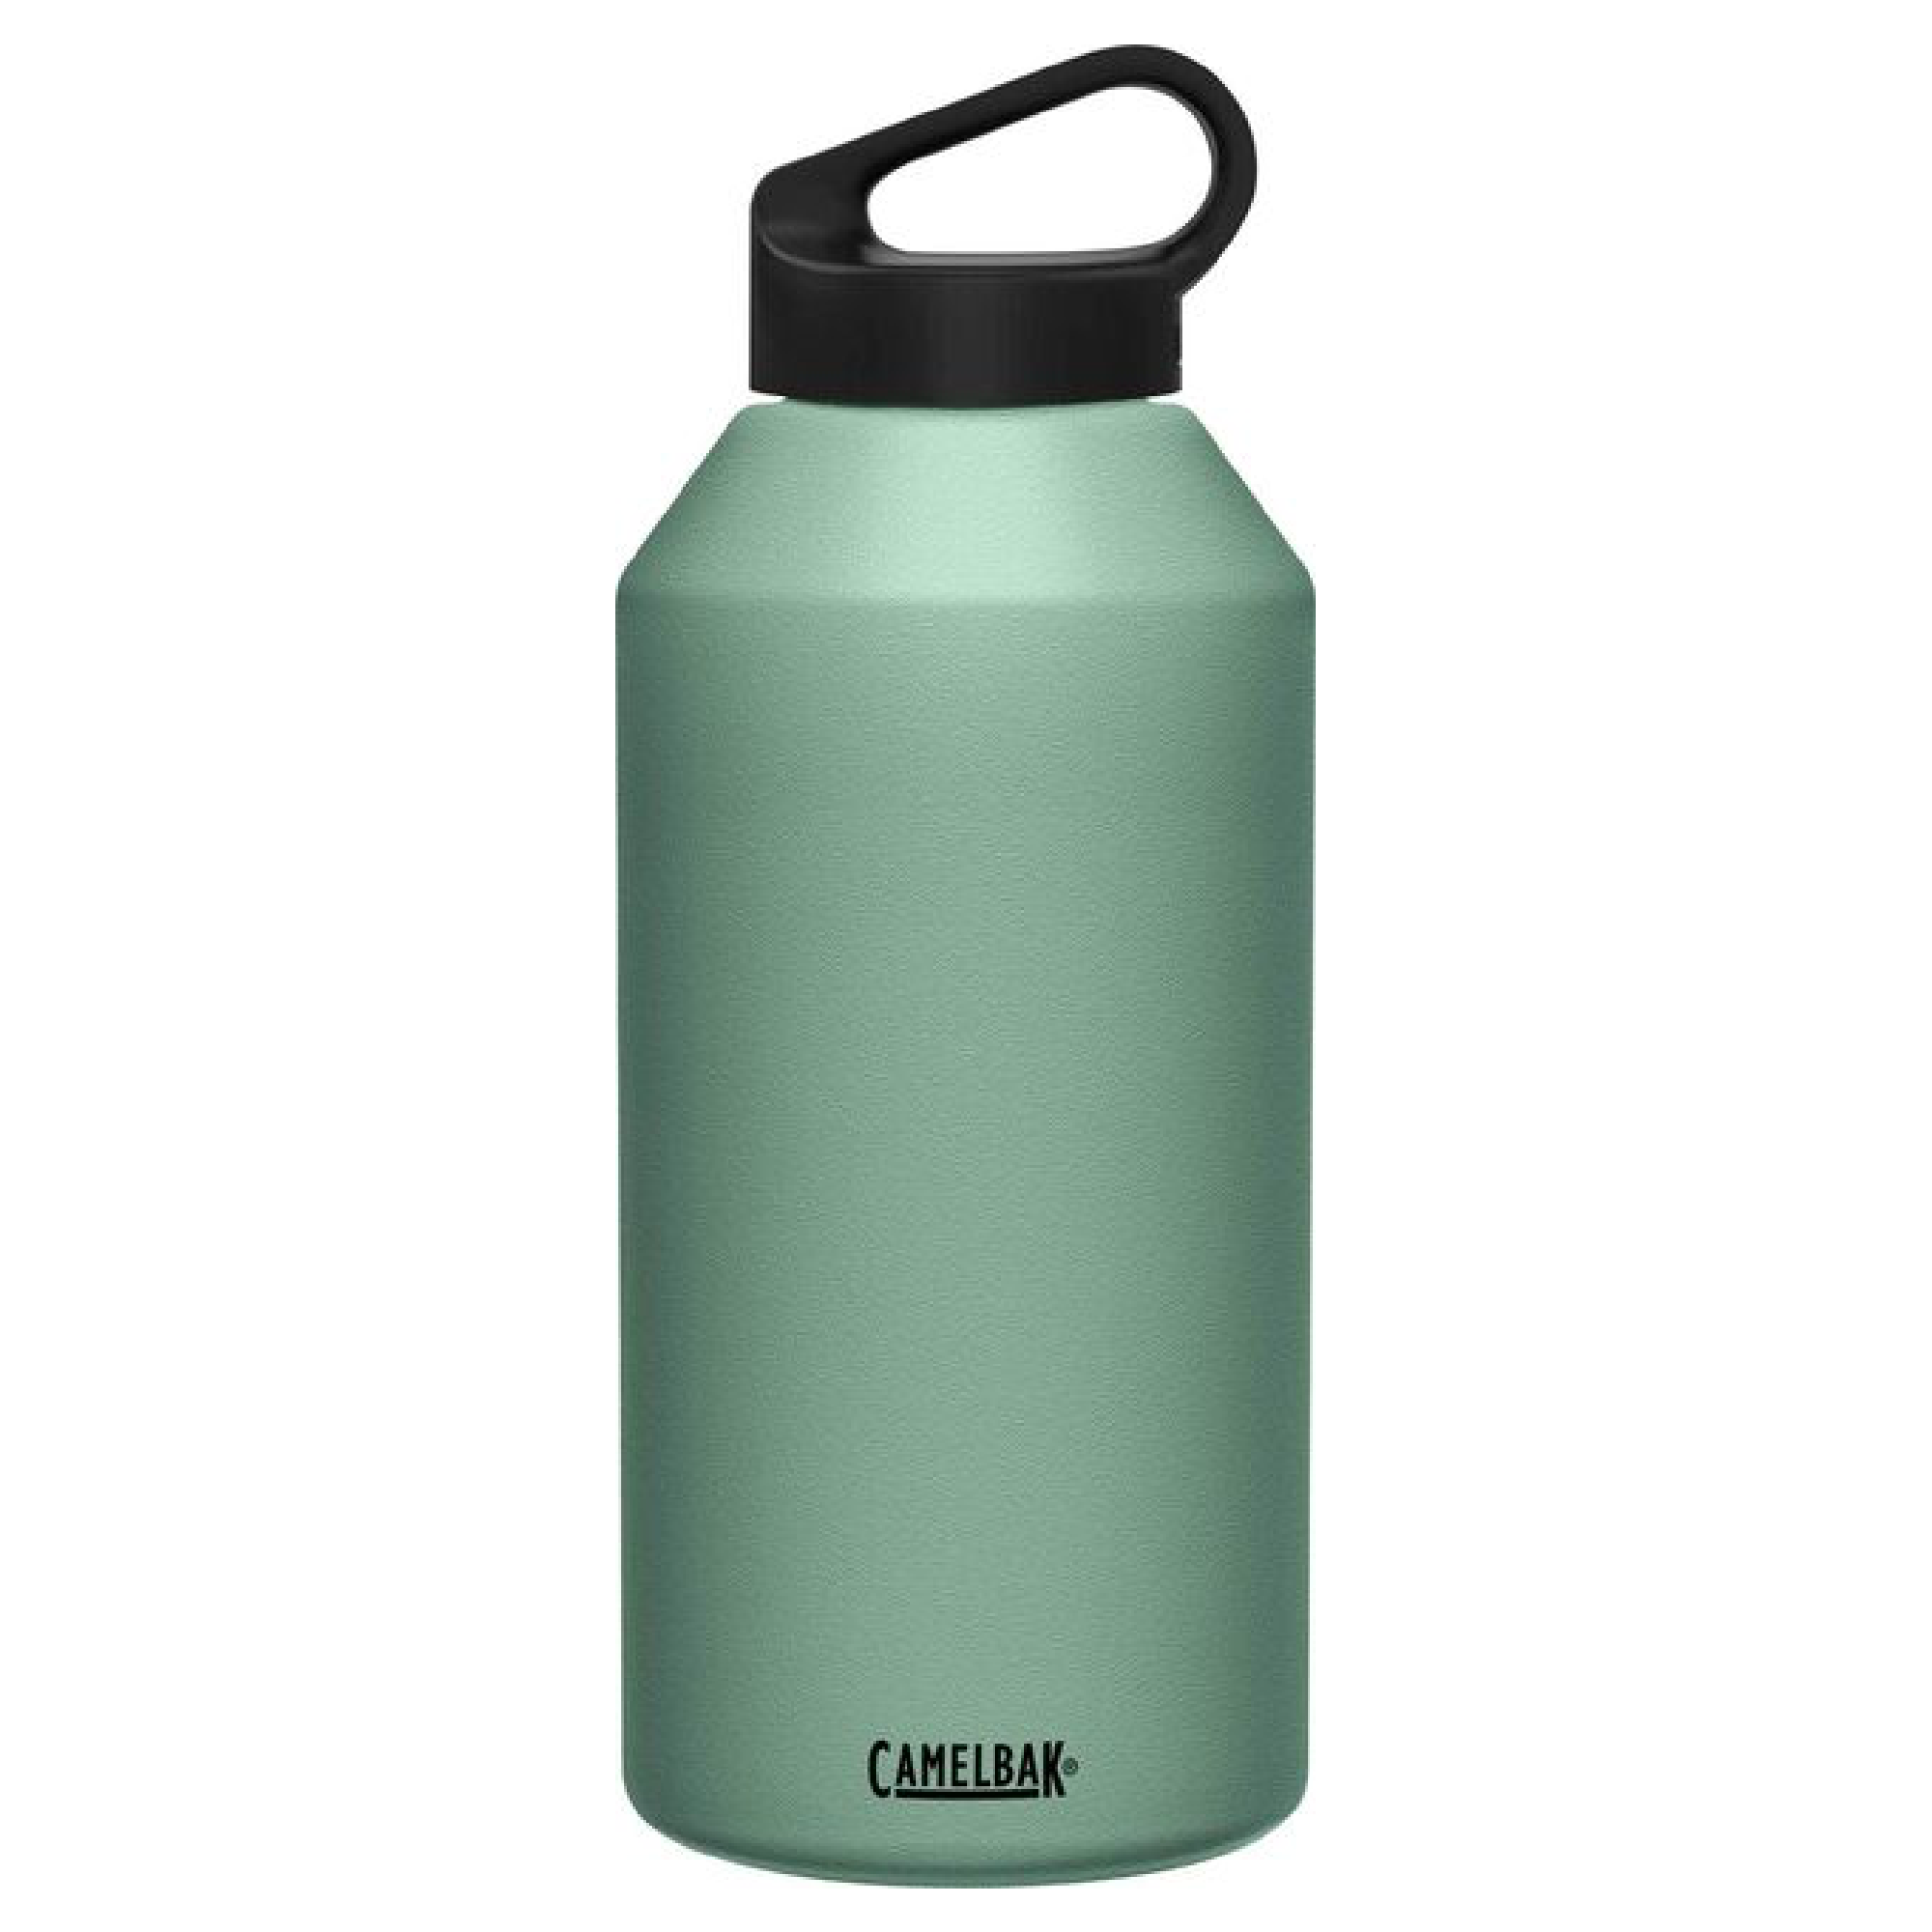 CamelBak | Carry Cap Insulated Stainless Steel Drink Bottle | 2L